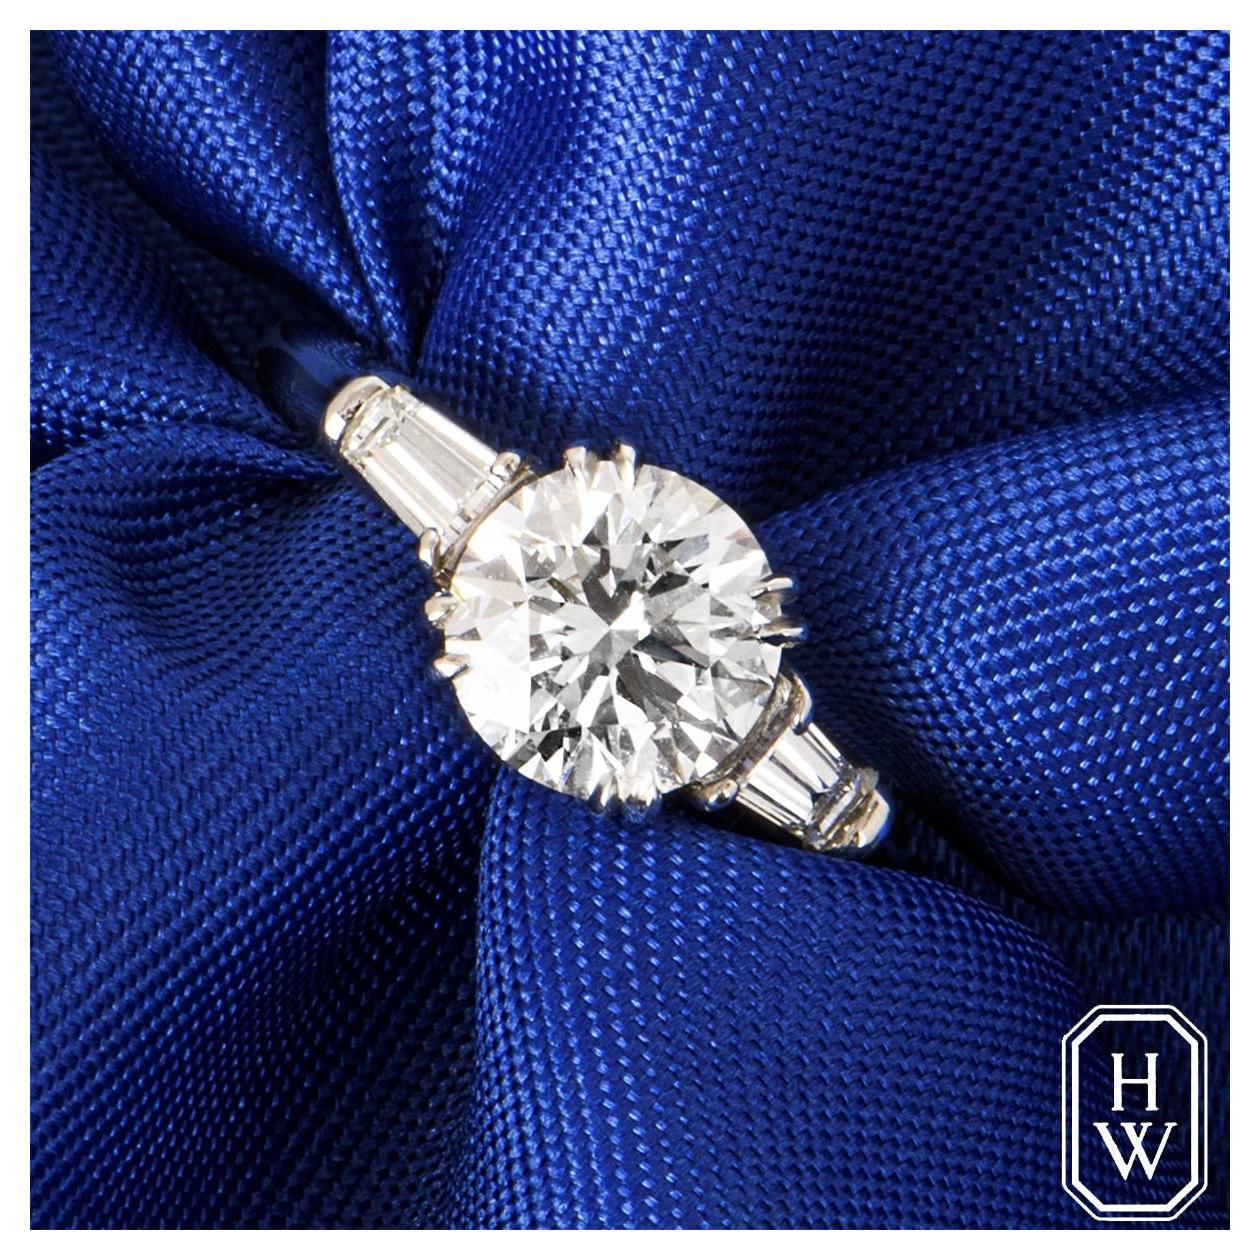 A captivating platinum diamond engagement ring by Harry Winston from the Classic collection. The three stone ring features a round brilliant cut diamond set to the centre in a 4 claw mount weighing 1.51ct, E colour and VS2 clarity. The centre